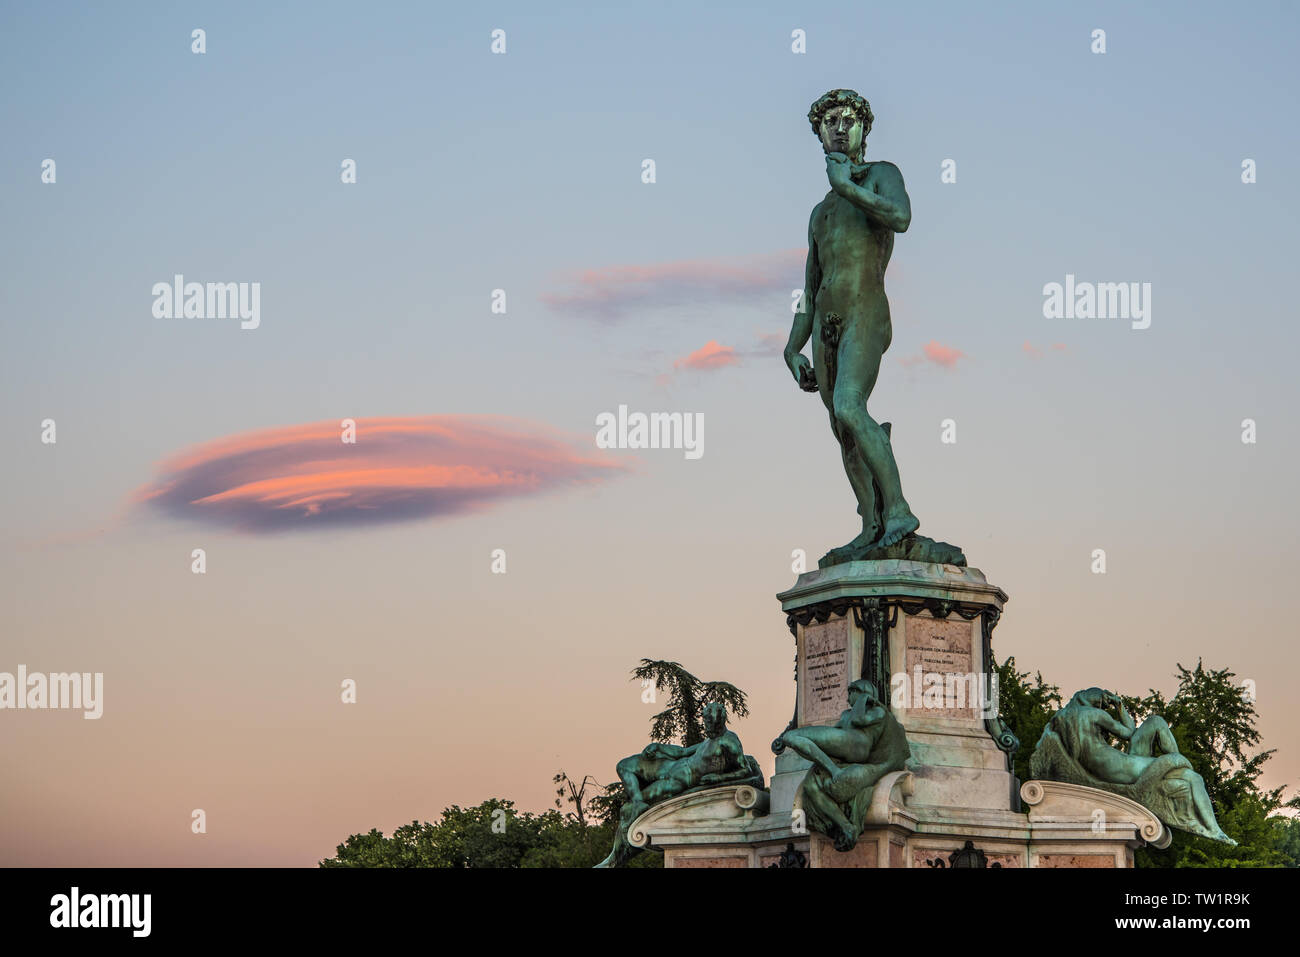 Piazza Michelangelo David statue at sunset with lenticular cloud Stock Photo